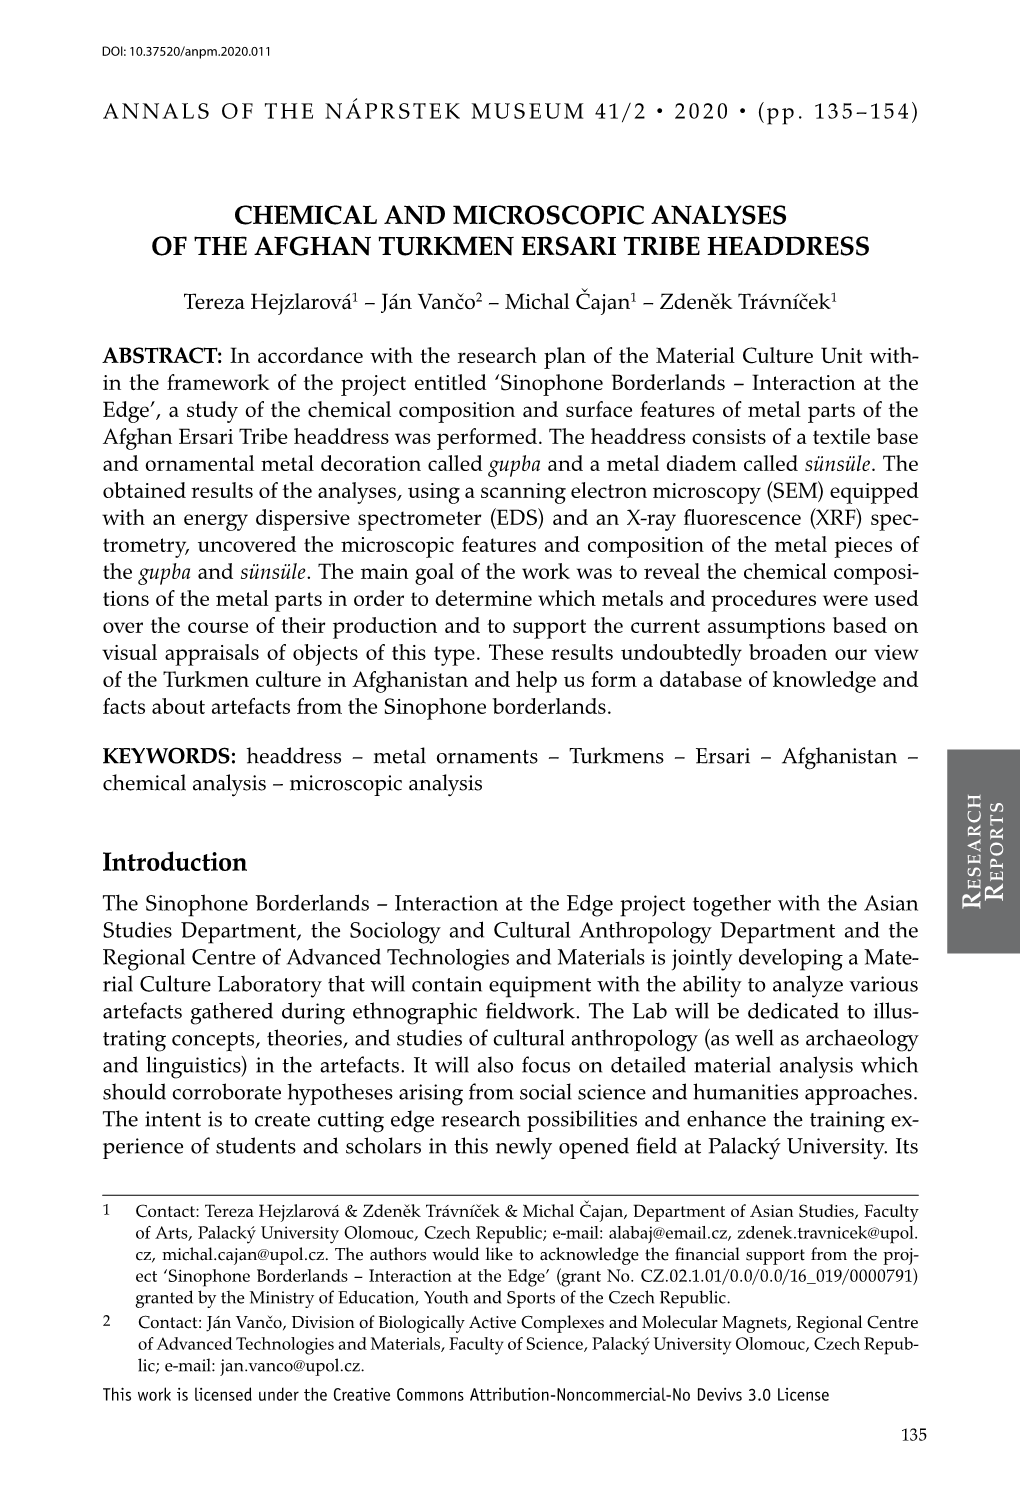 R R Chemical and Microscopic Analyses of the Afghan Turkmen